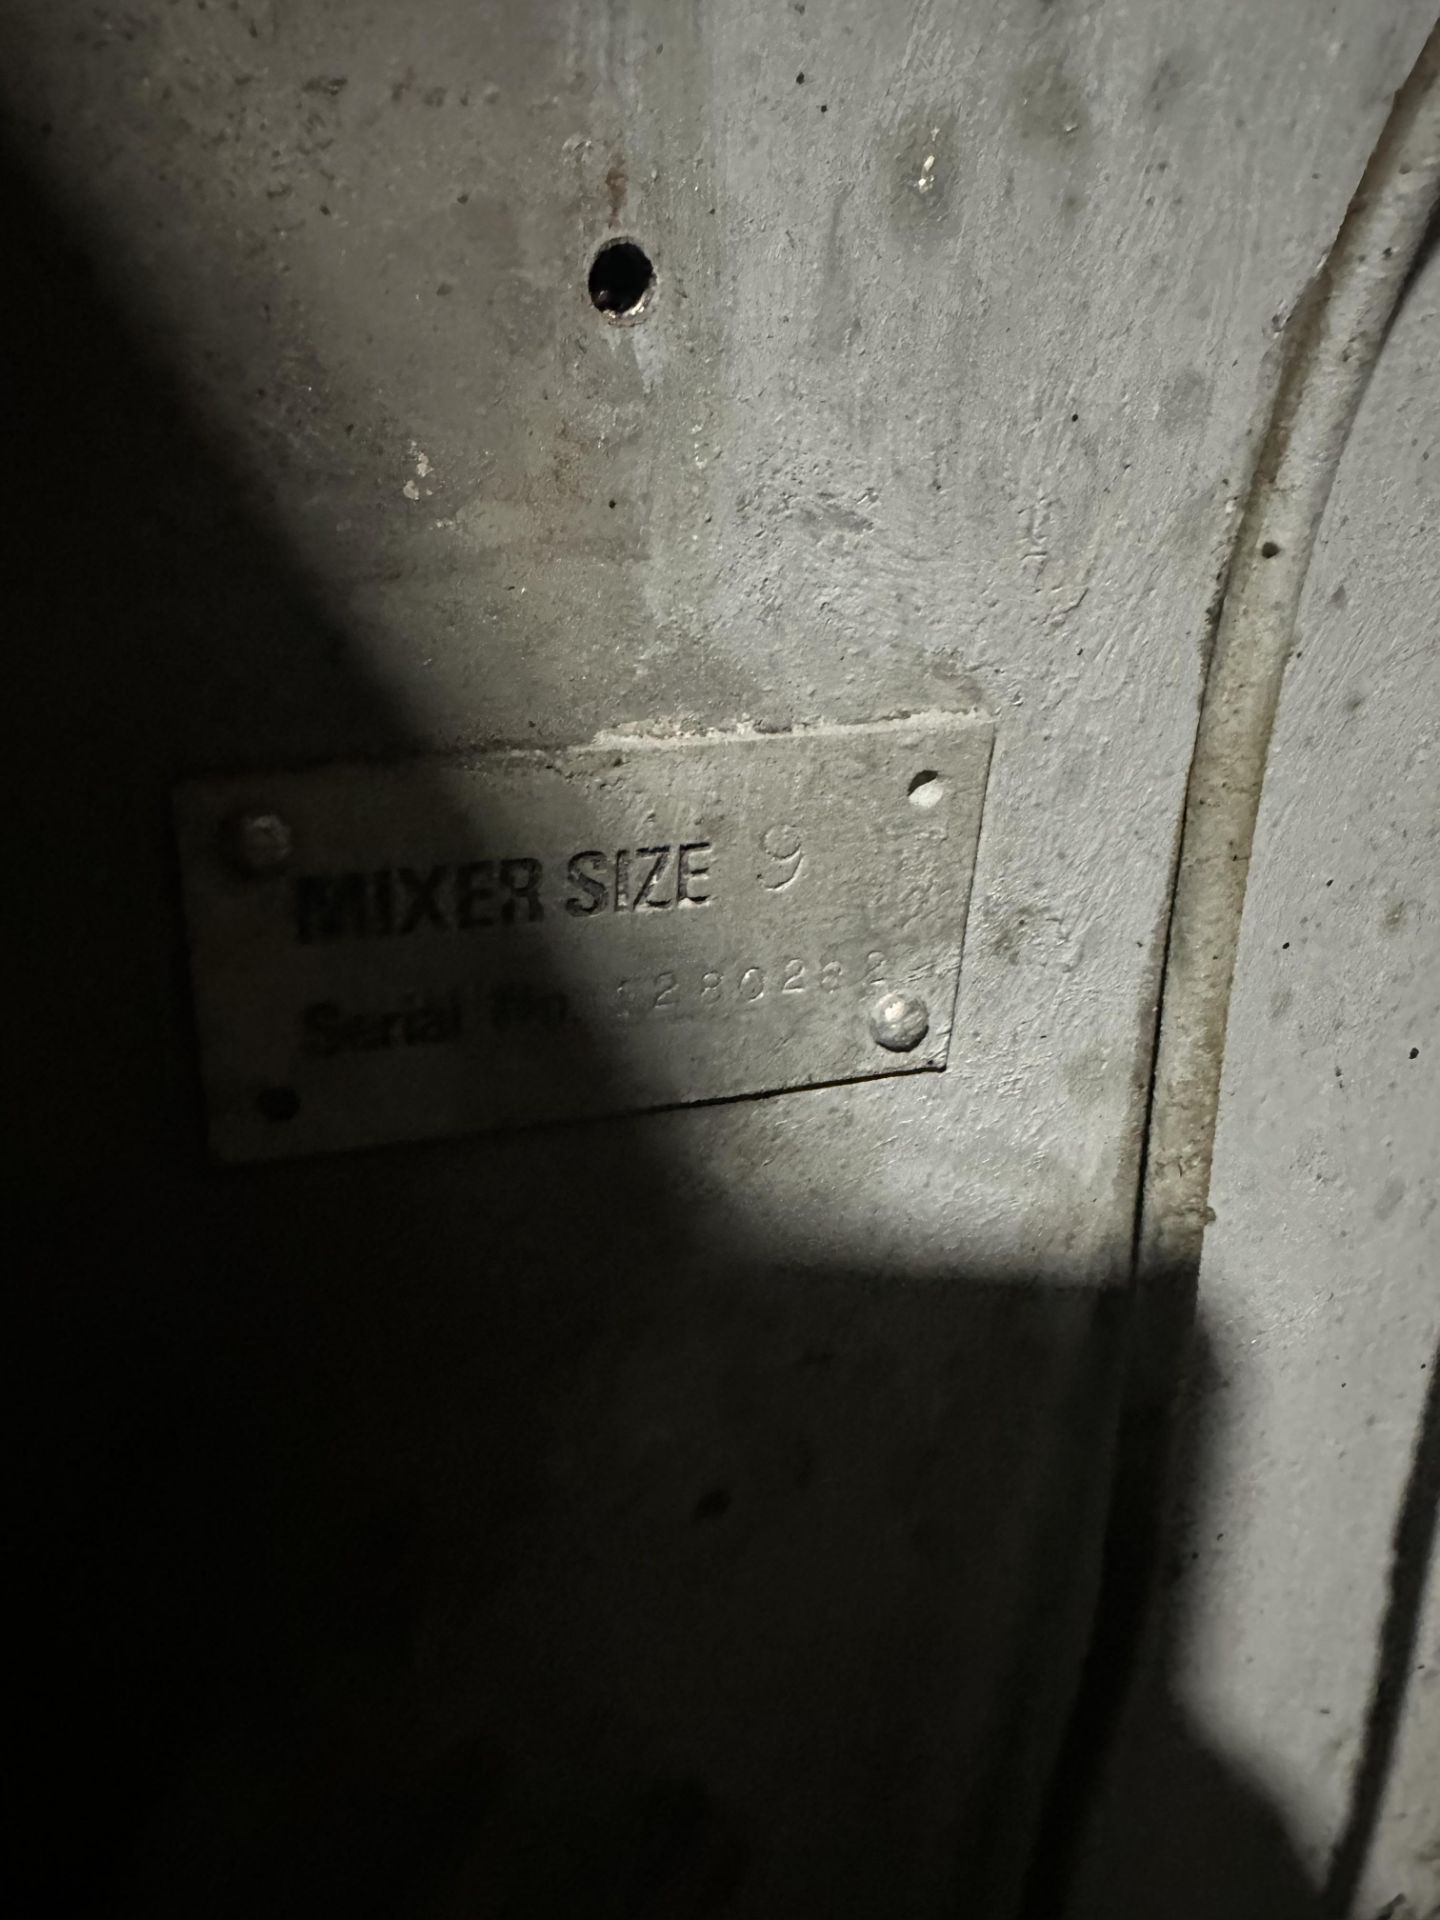 (Located In Springfield, MI) BEW Sigma Blade Mixer Size 9 S/N 1280282 - Image 7 of 10